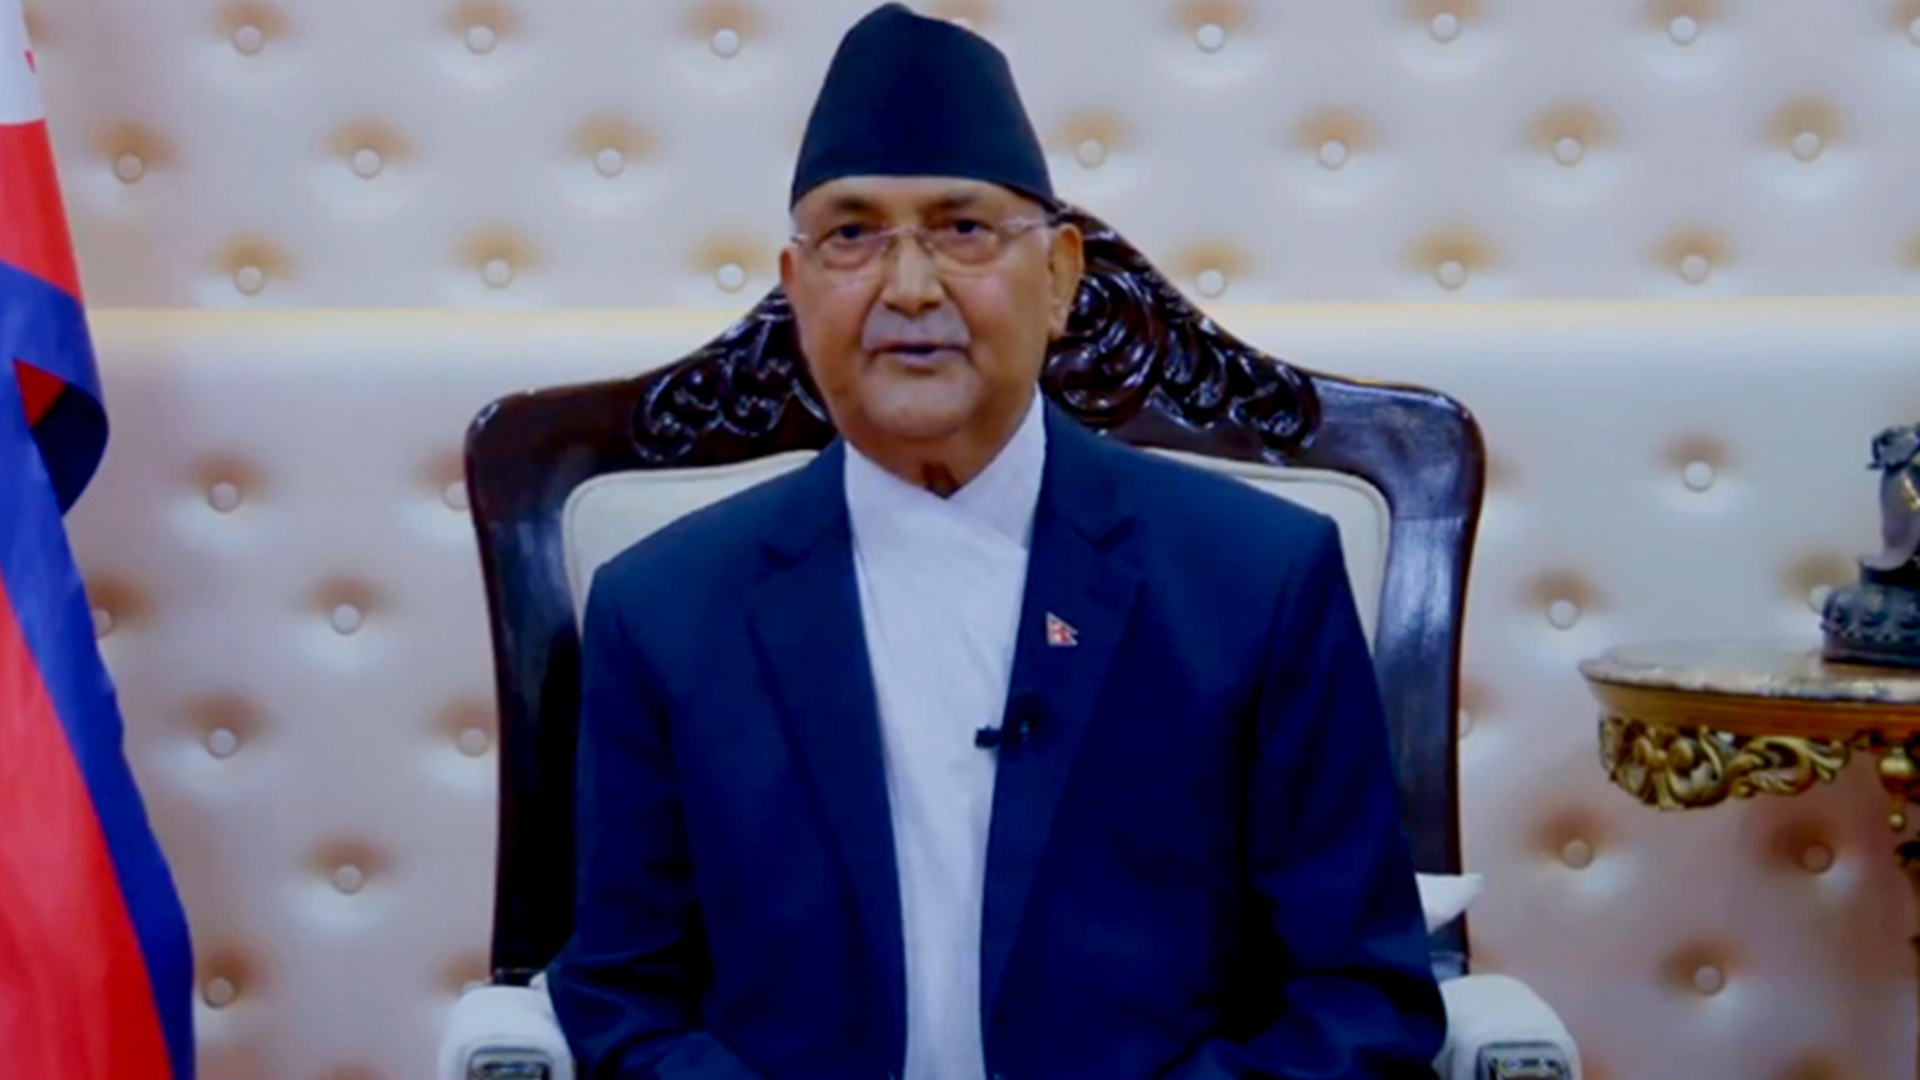 Government has created an investment-friendly environment: Prime Minister Oli